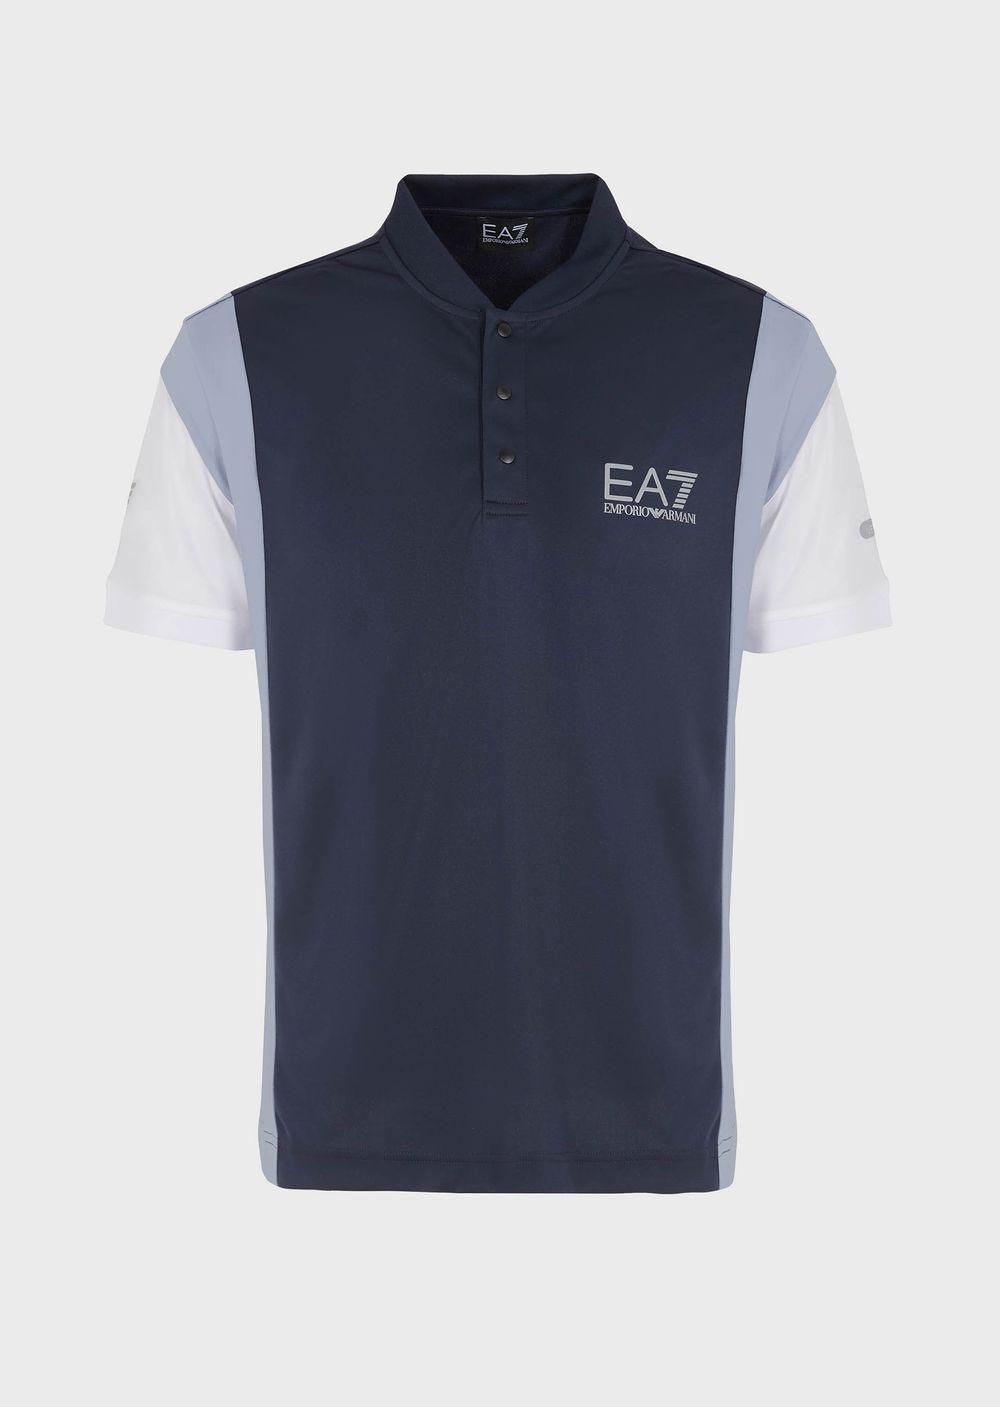 EA7 Tennis Pro Polo Shirt In Ventus7 Technical Fabric in Blue for Men ...